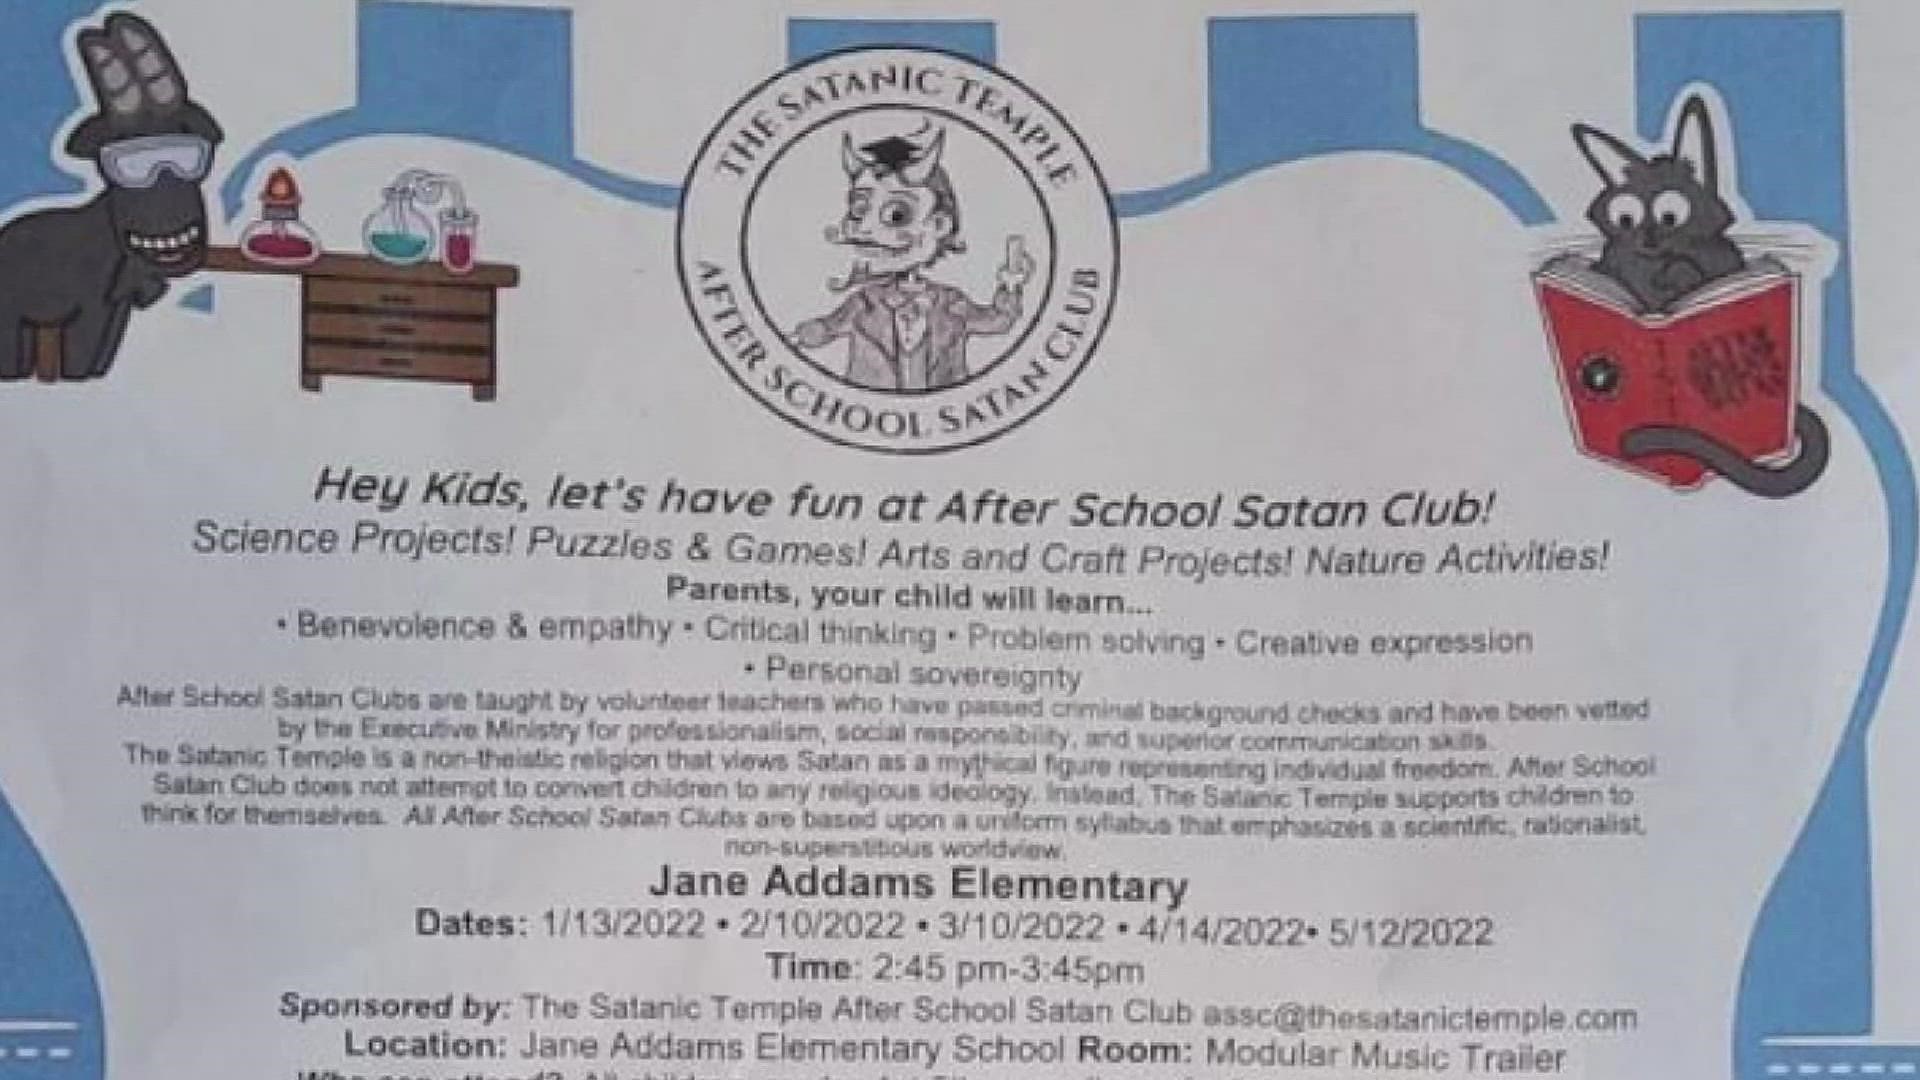 The district is facing controversy after a flyer inviting students to "After School Satan Club" began making the rounds on social media earlier this week.